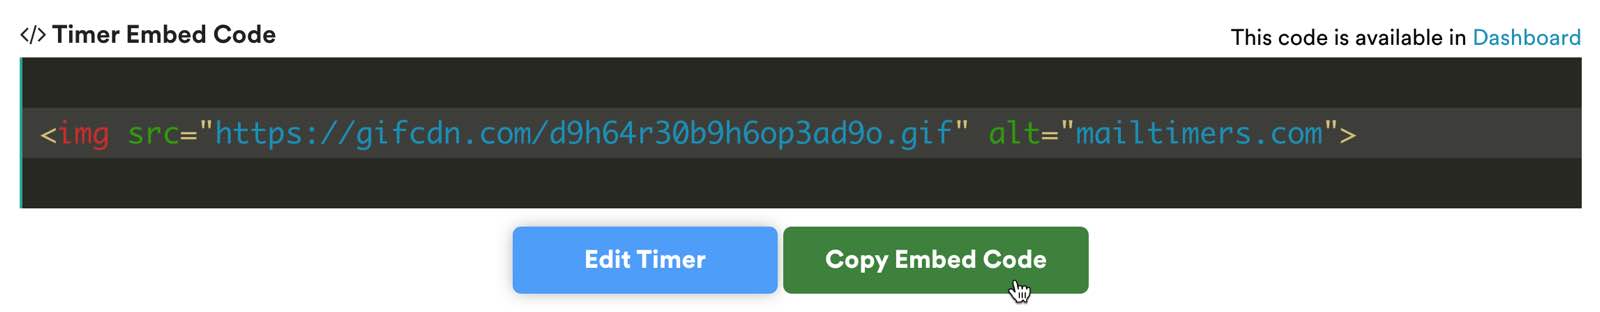 A timer embed code in MailTimers